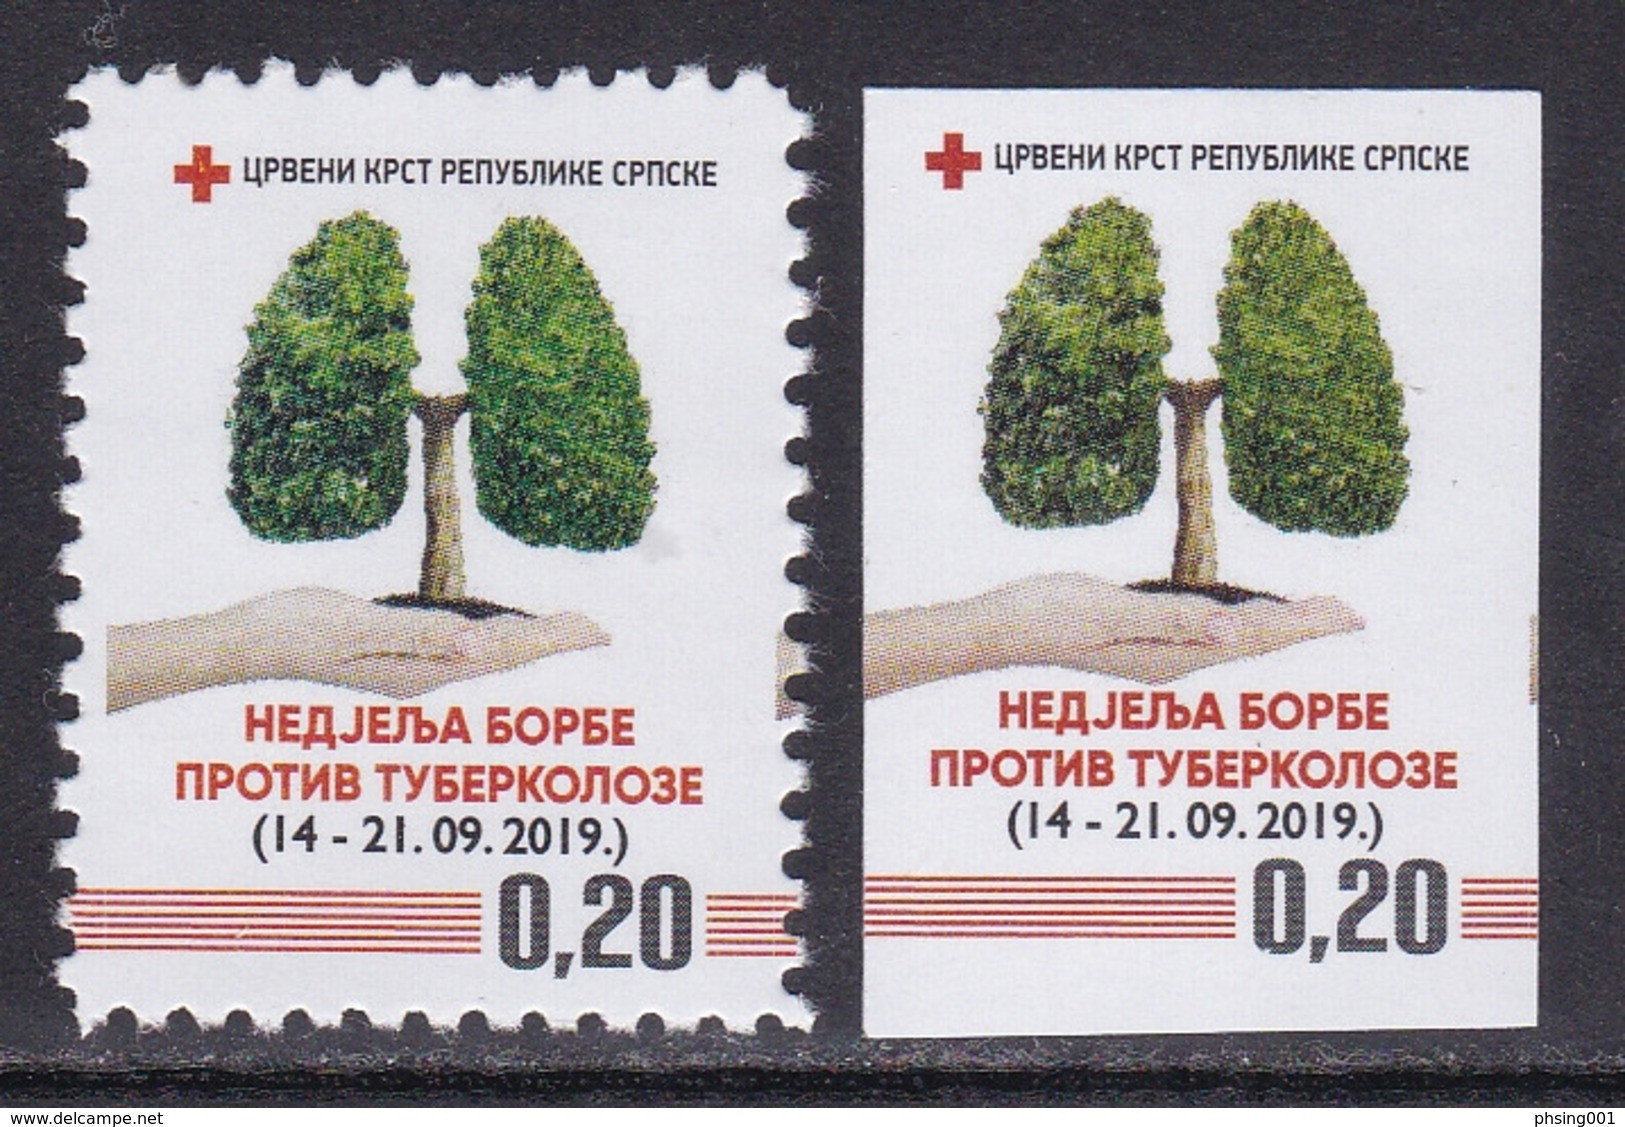 Bosnia Serbia 2019 TBC Red Cross Tax Charity Surcharge, Perforated + Imperforated Stamp MNH - Rotes Kreuz